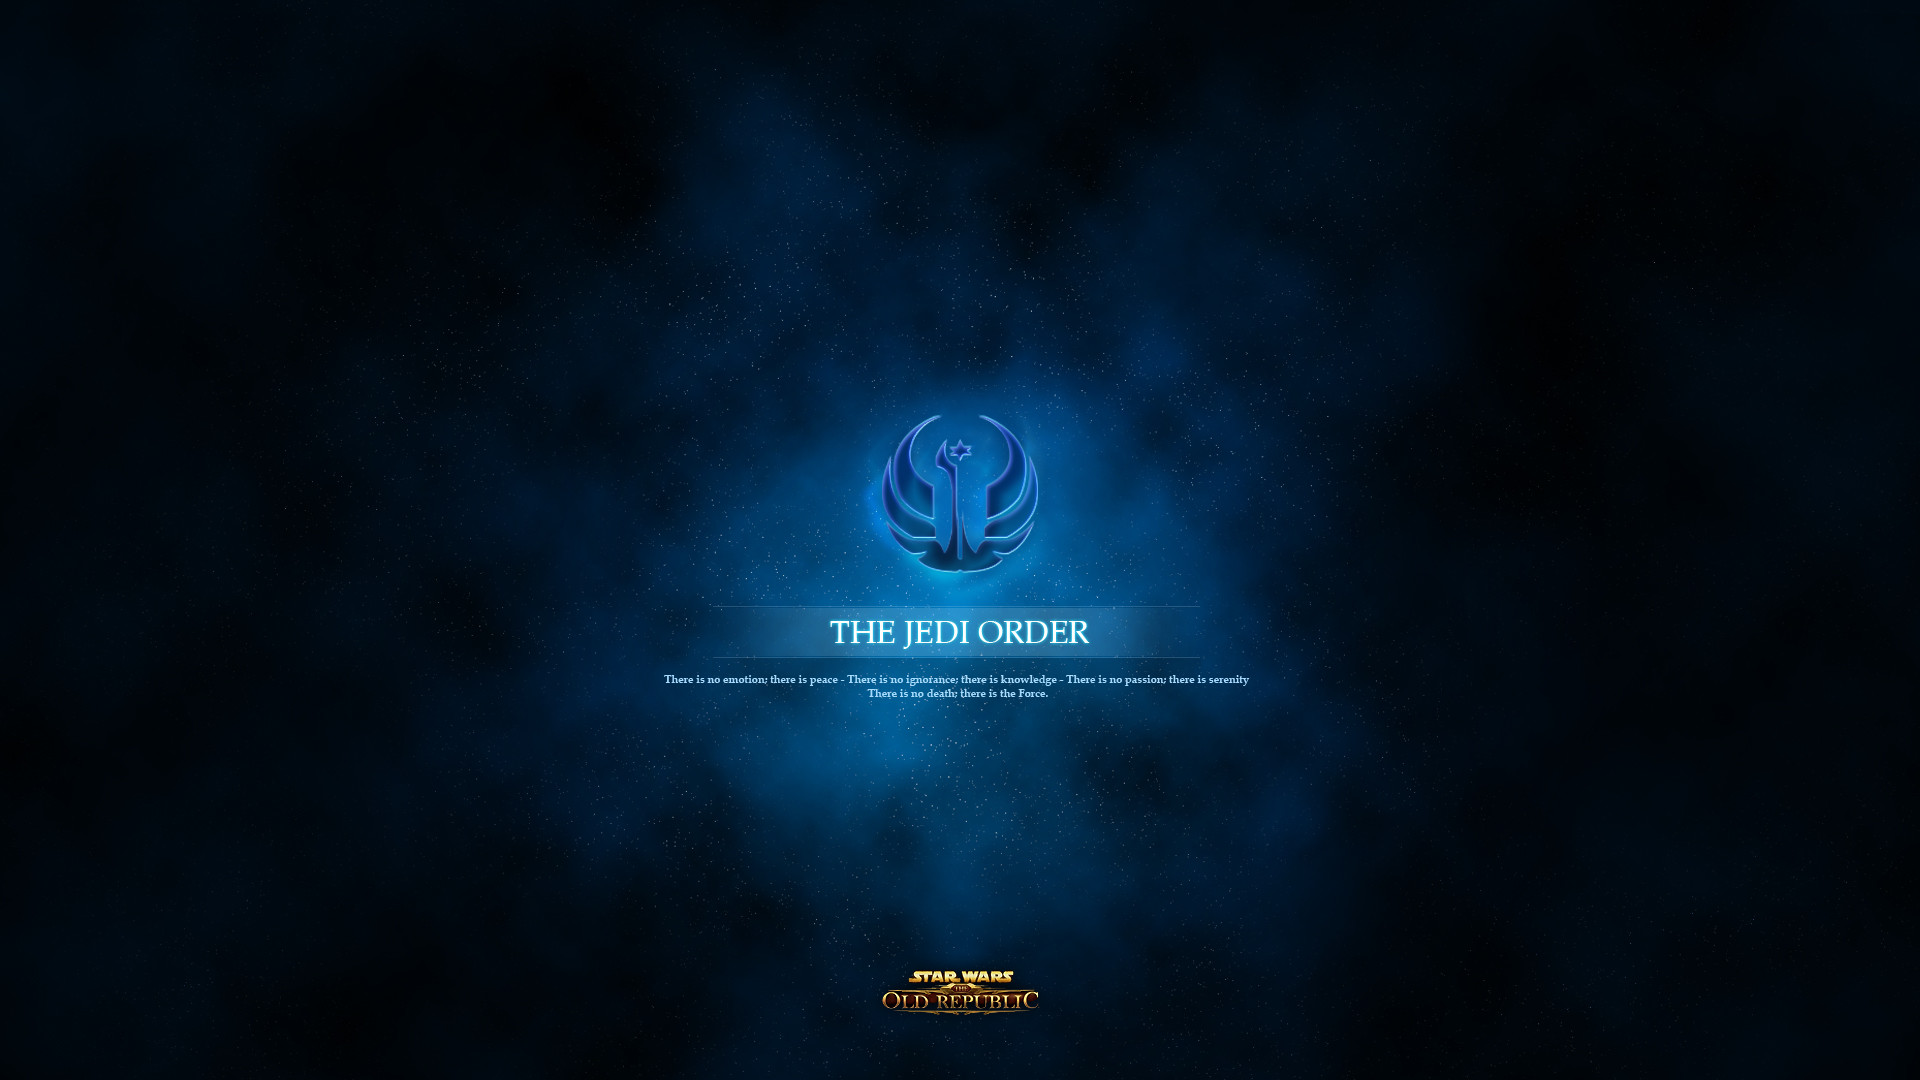 1920x1080 Video Game - Star Wars: The Old Republic Wallpaper